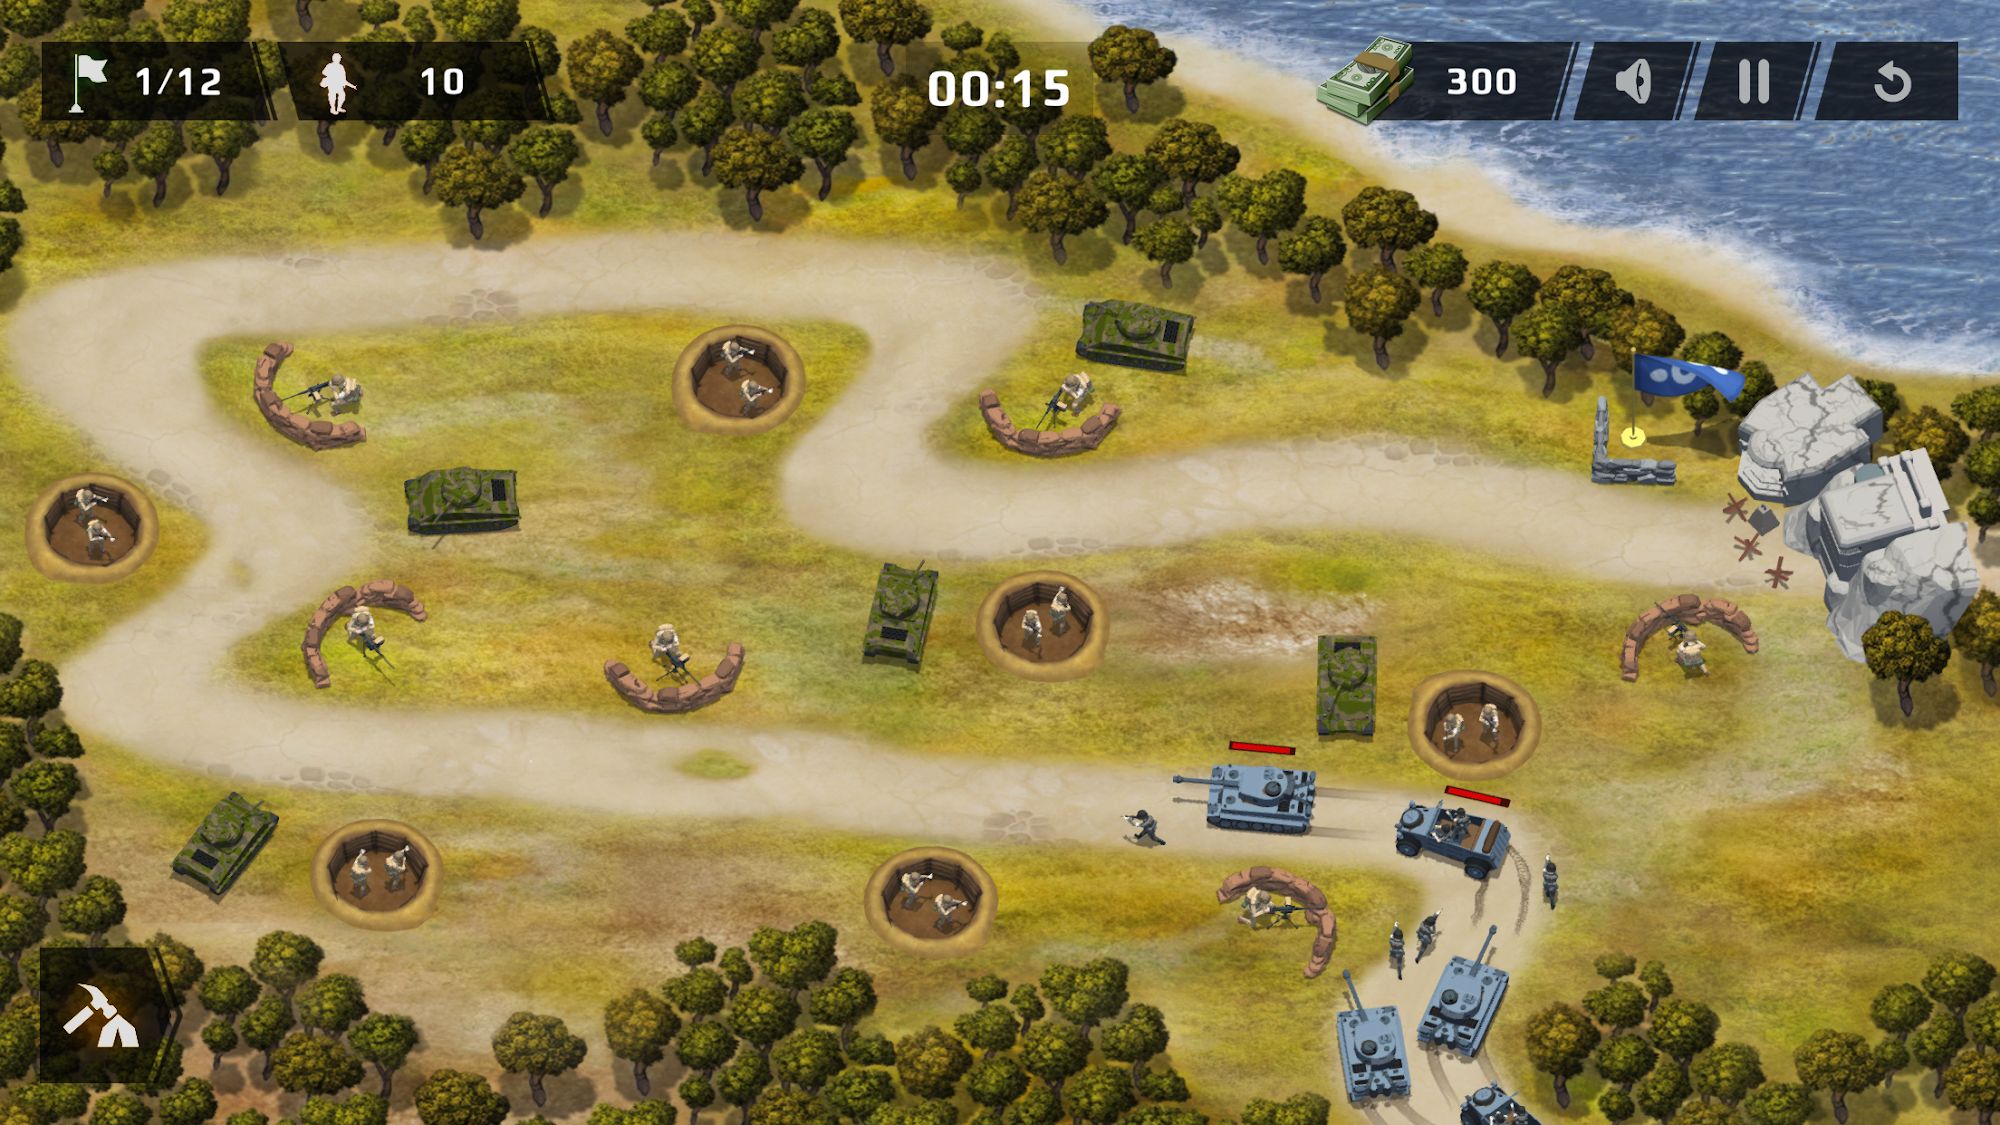 Scarica WWII Defense: RTS Army TD game gratis per Android.